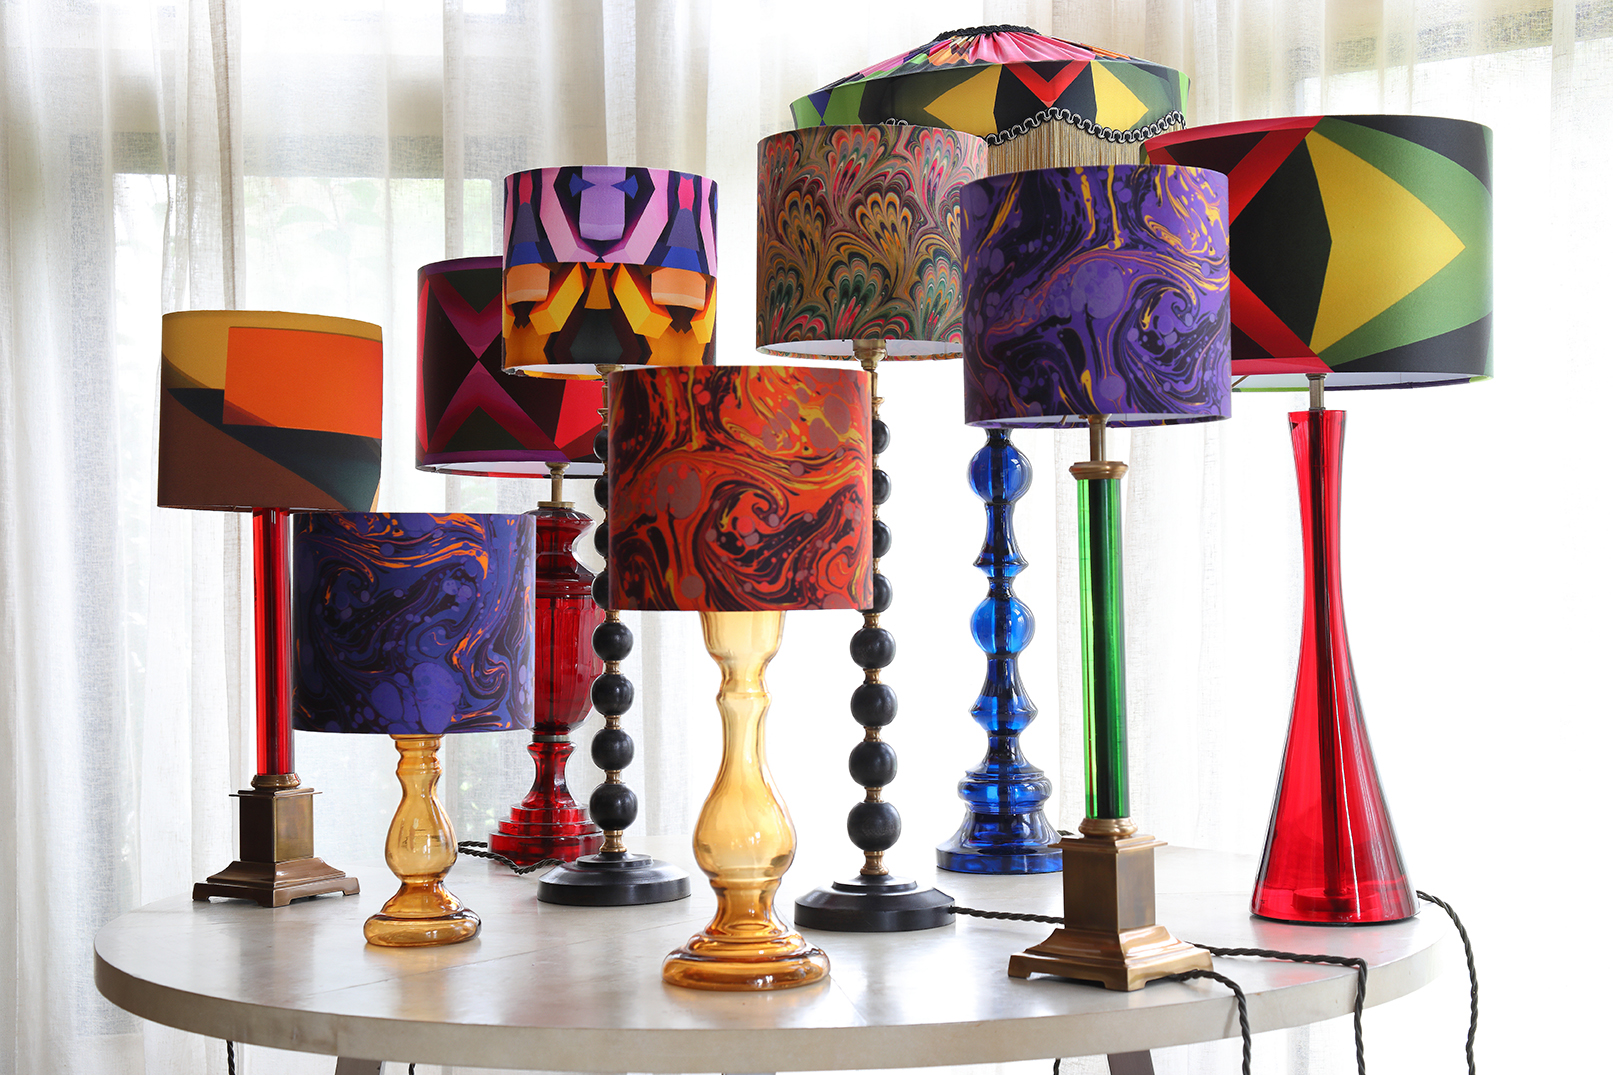 A collection of lamps with colourful patterned shades and coloured glass stands on a circular table in front of windows.